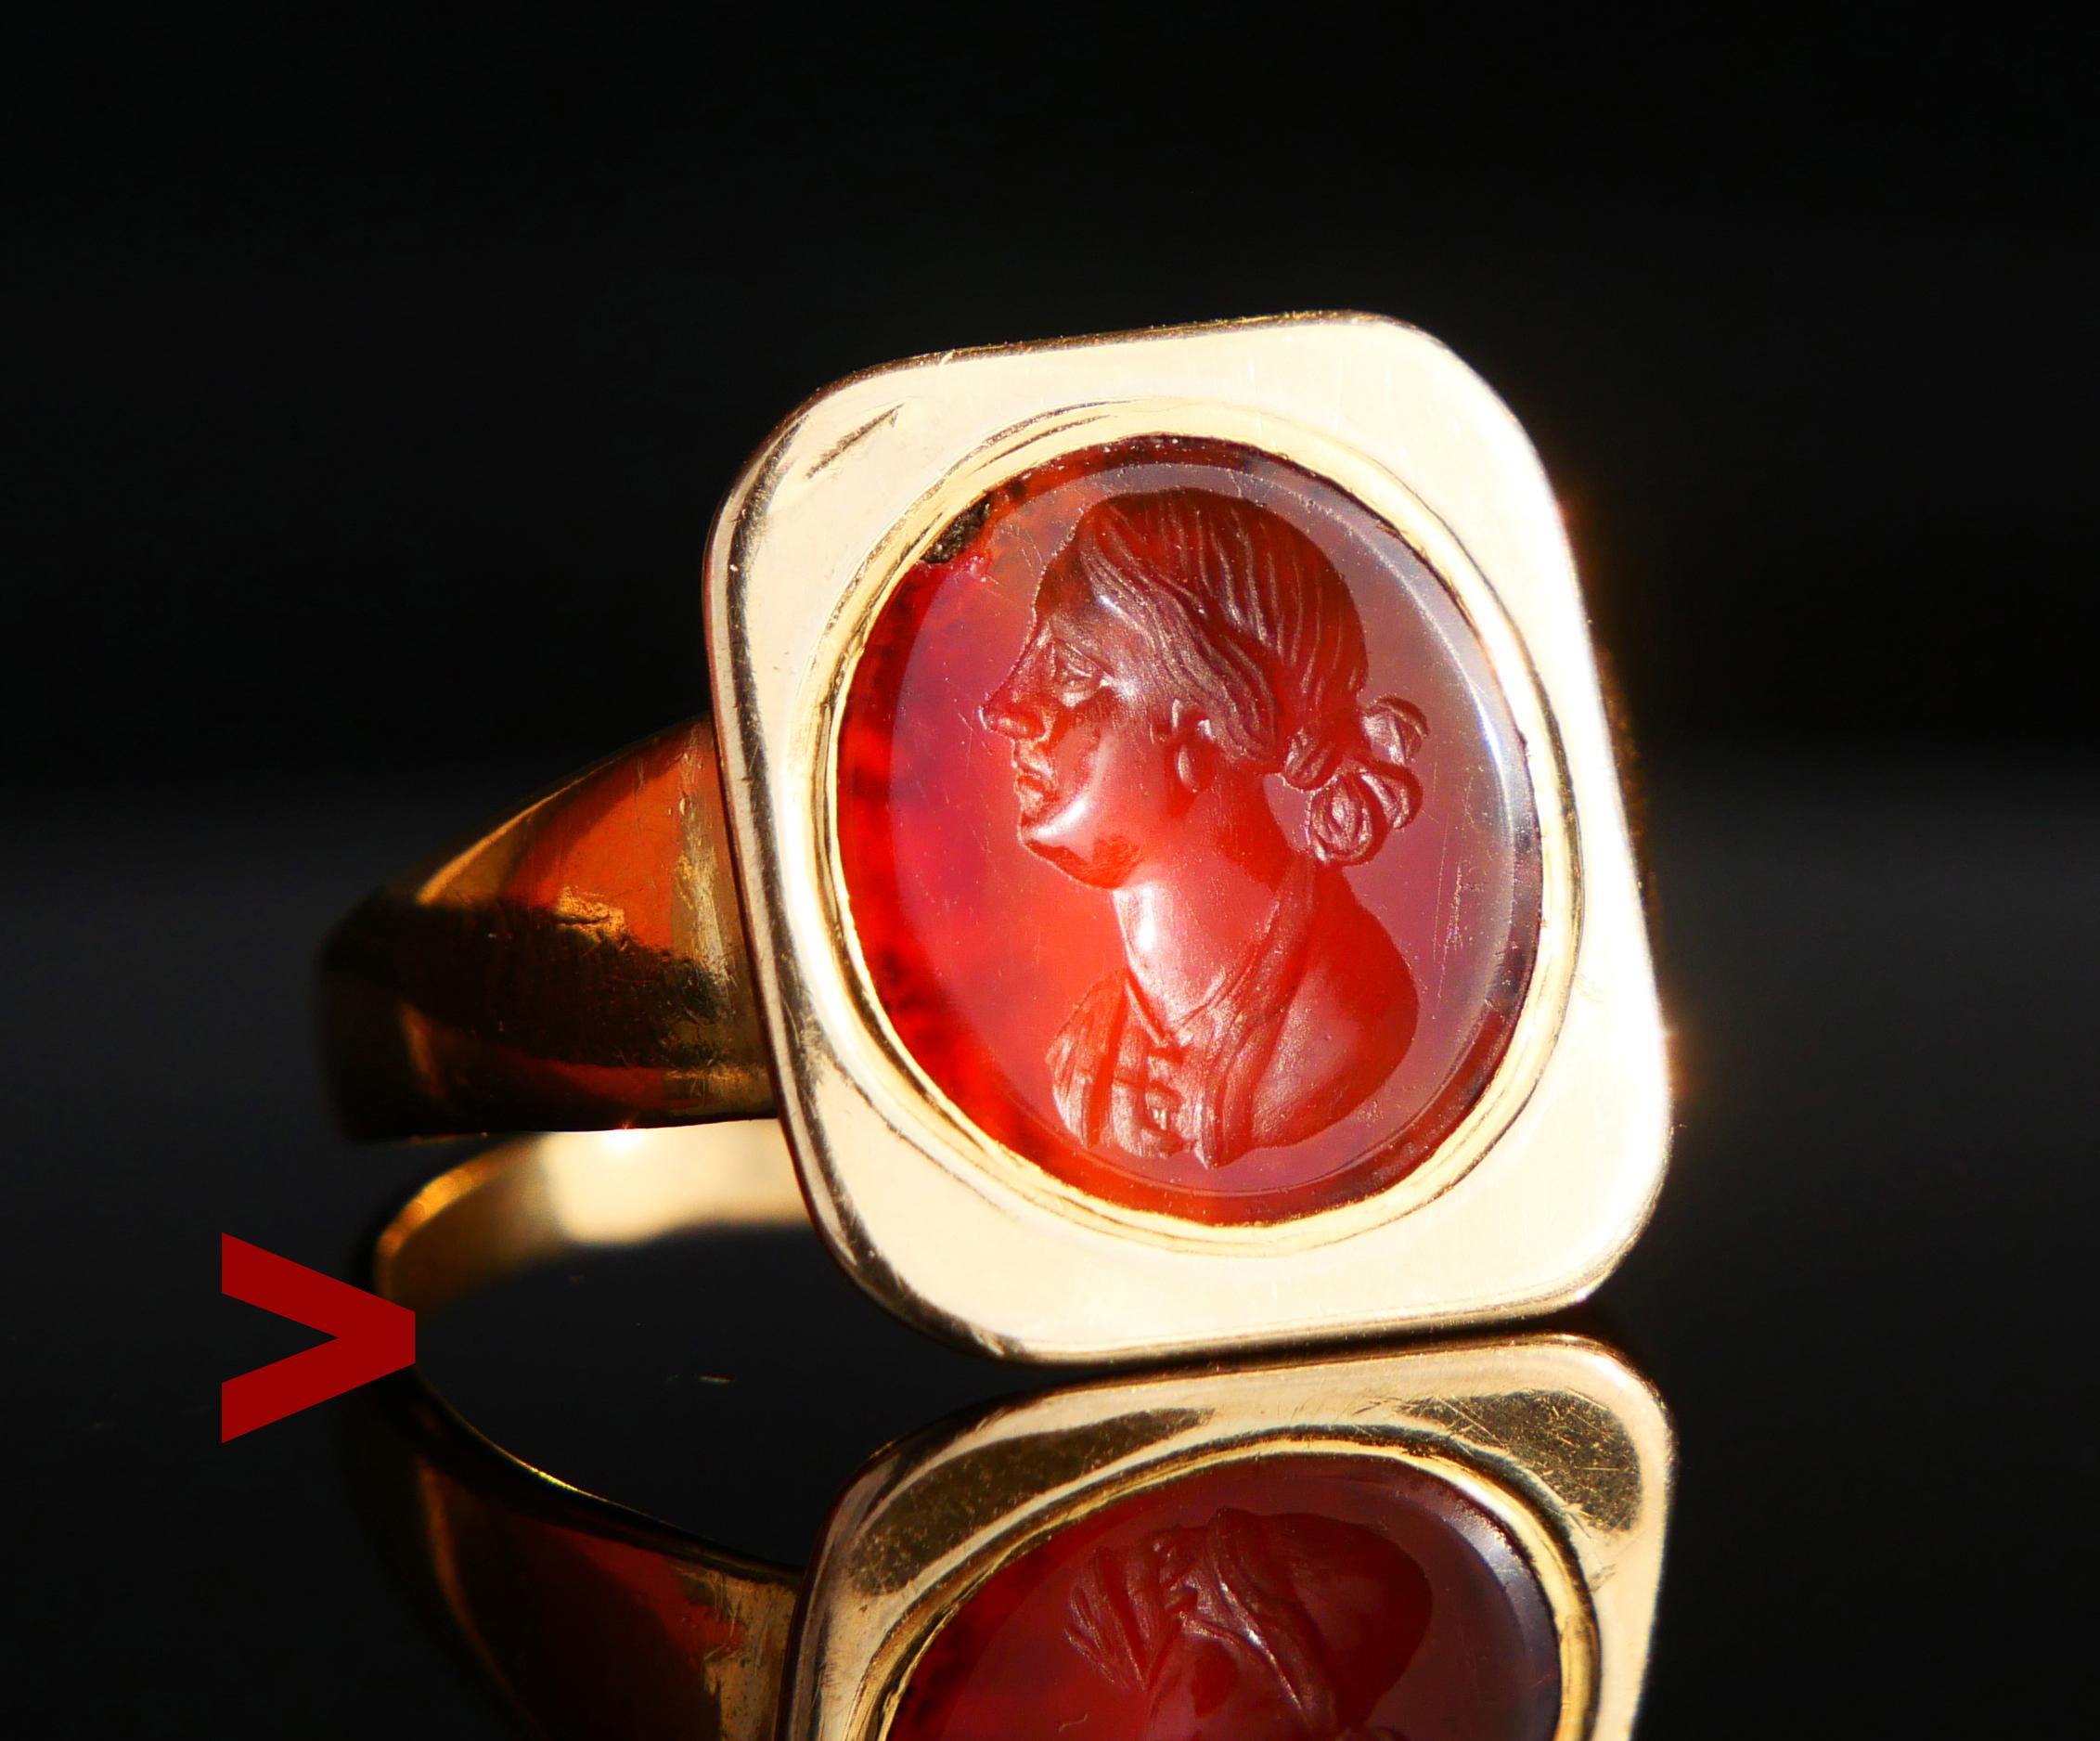 Signet intaglio Ring featuring natural Carnelian stone with naturalistic and symbolic intaglio of a middle aged Woman - Wife , Mother or Sister measuring 10 mm x 5 mm . The body of the stone is dark Orange measuring 12 mm x 10 / ca. 5 ct. Very well